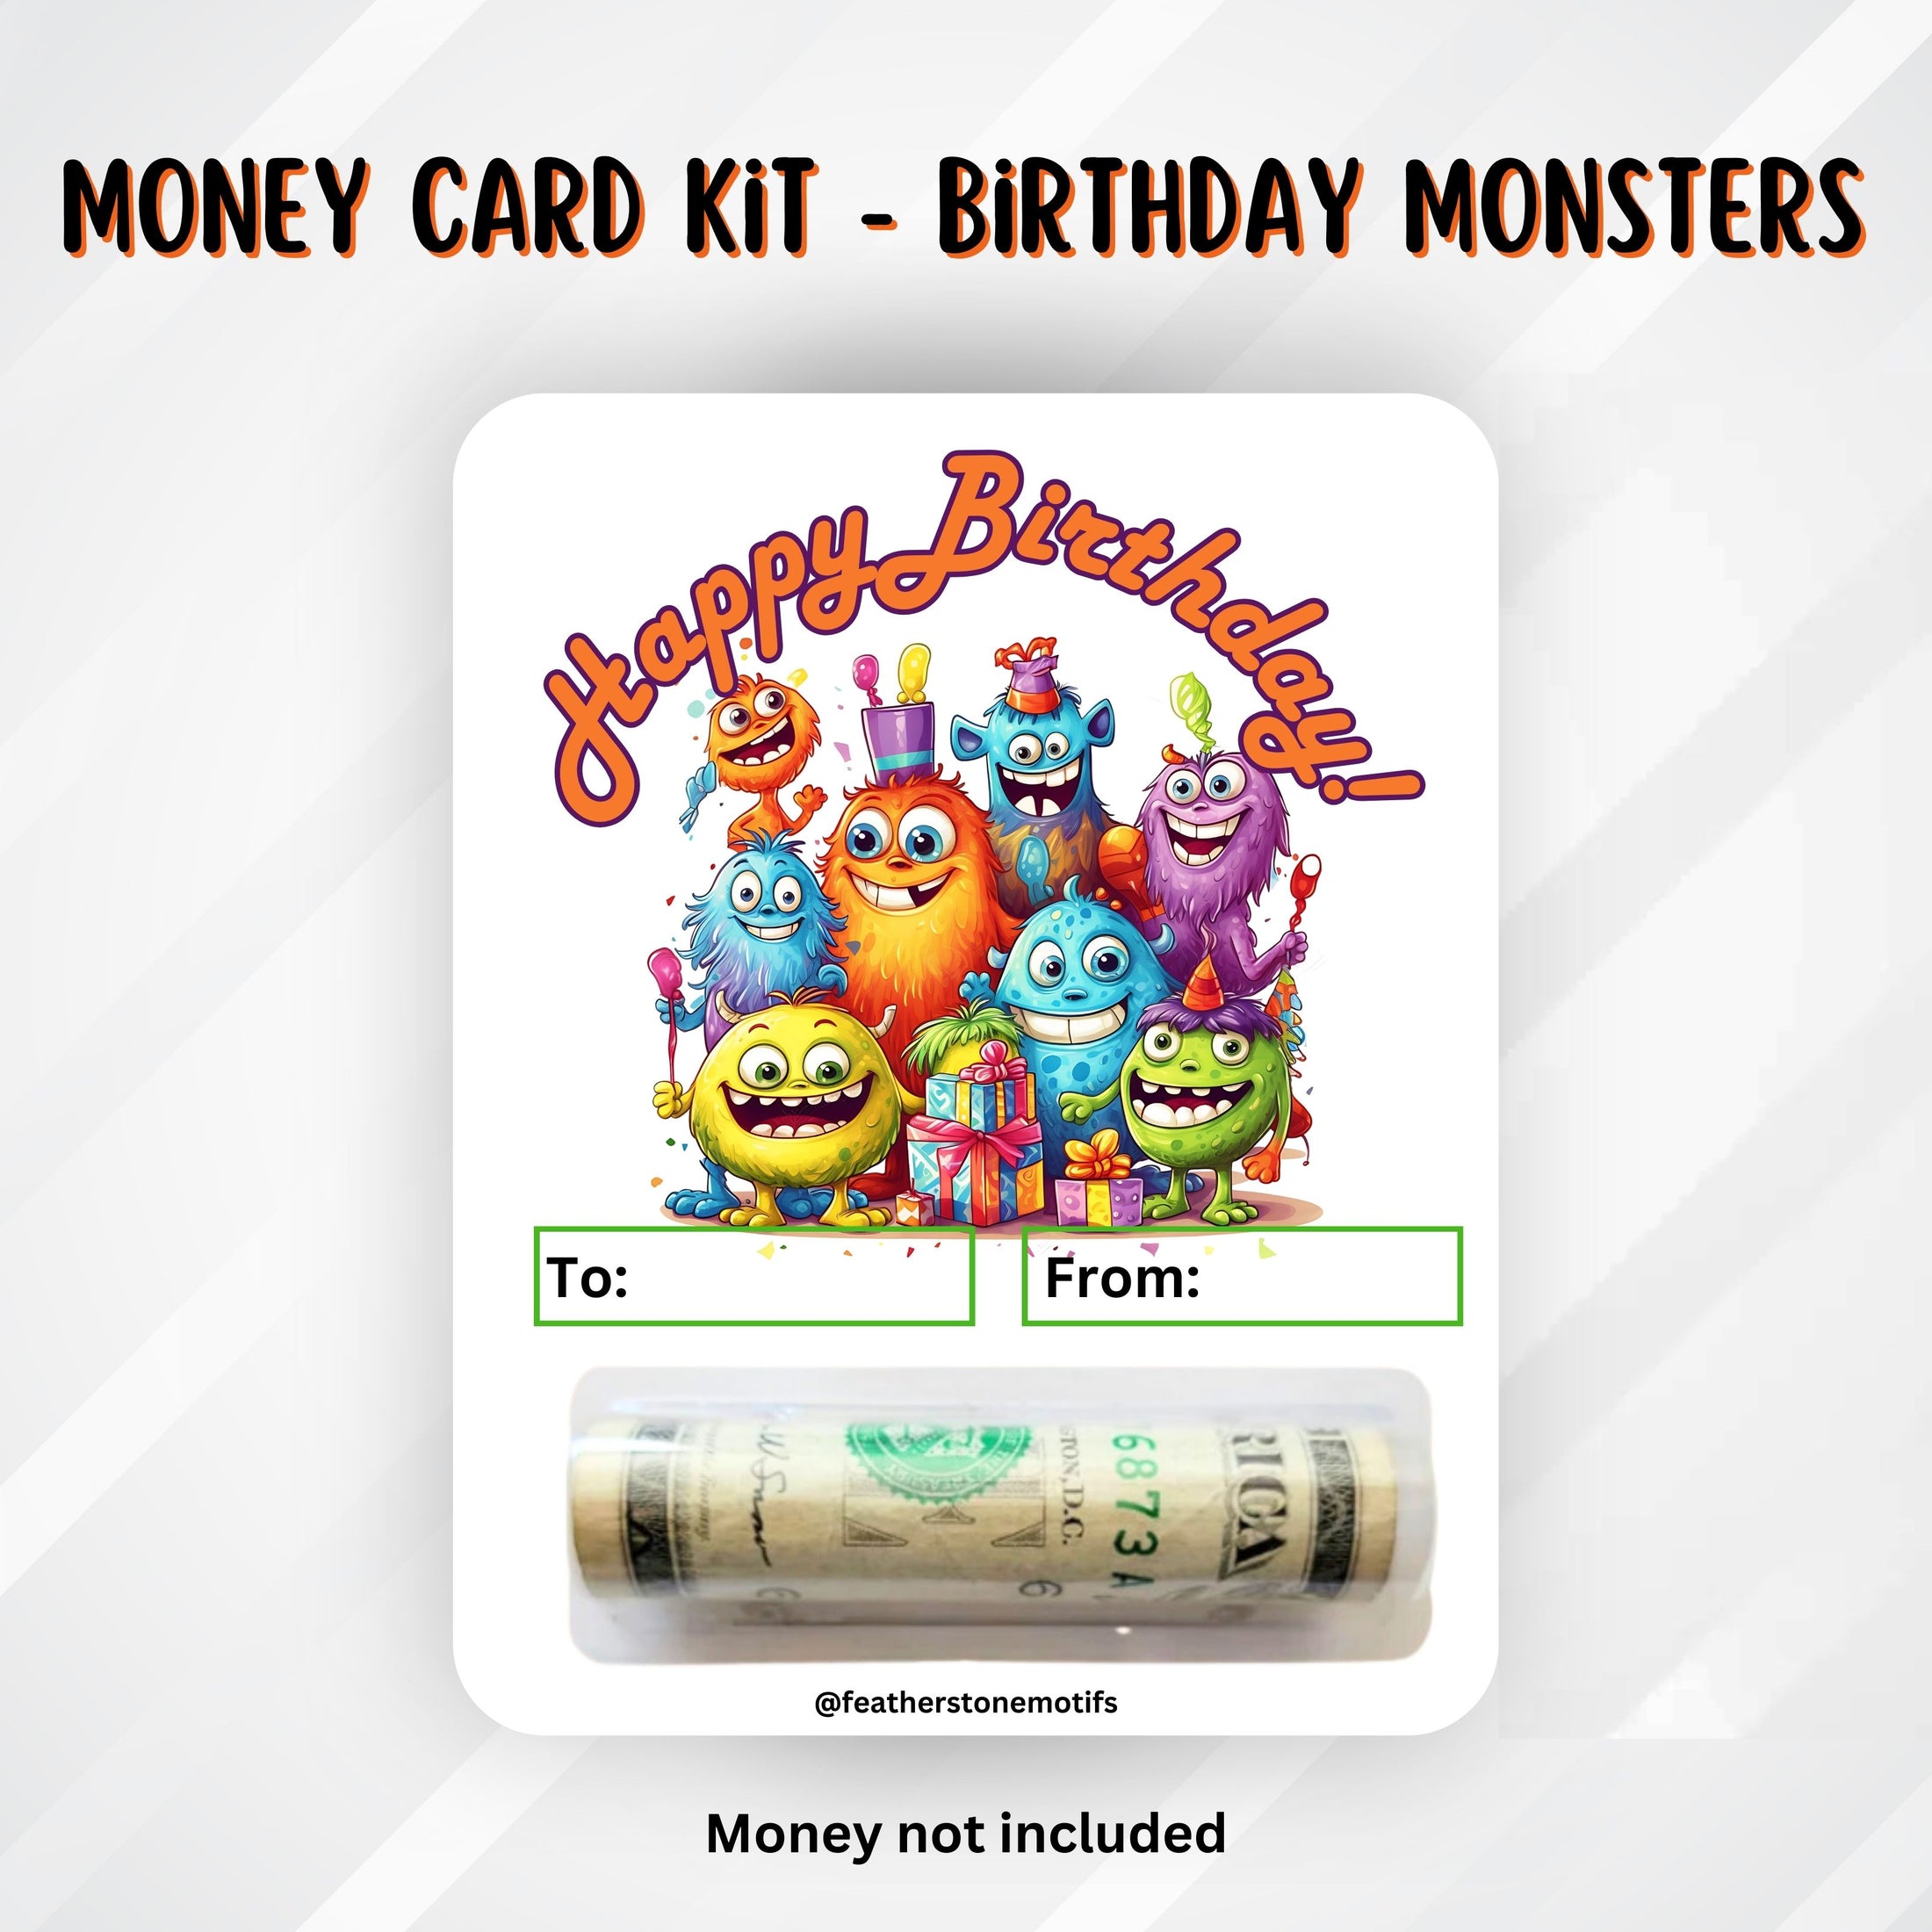 This image shows the money tube attached to the Birthday Monsters money card.